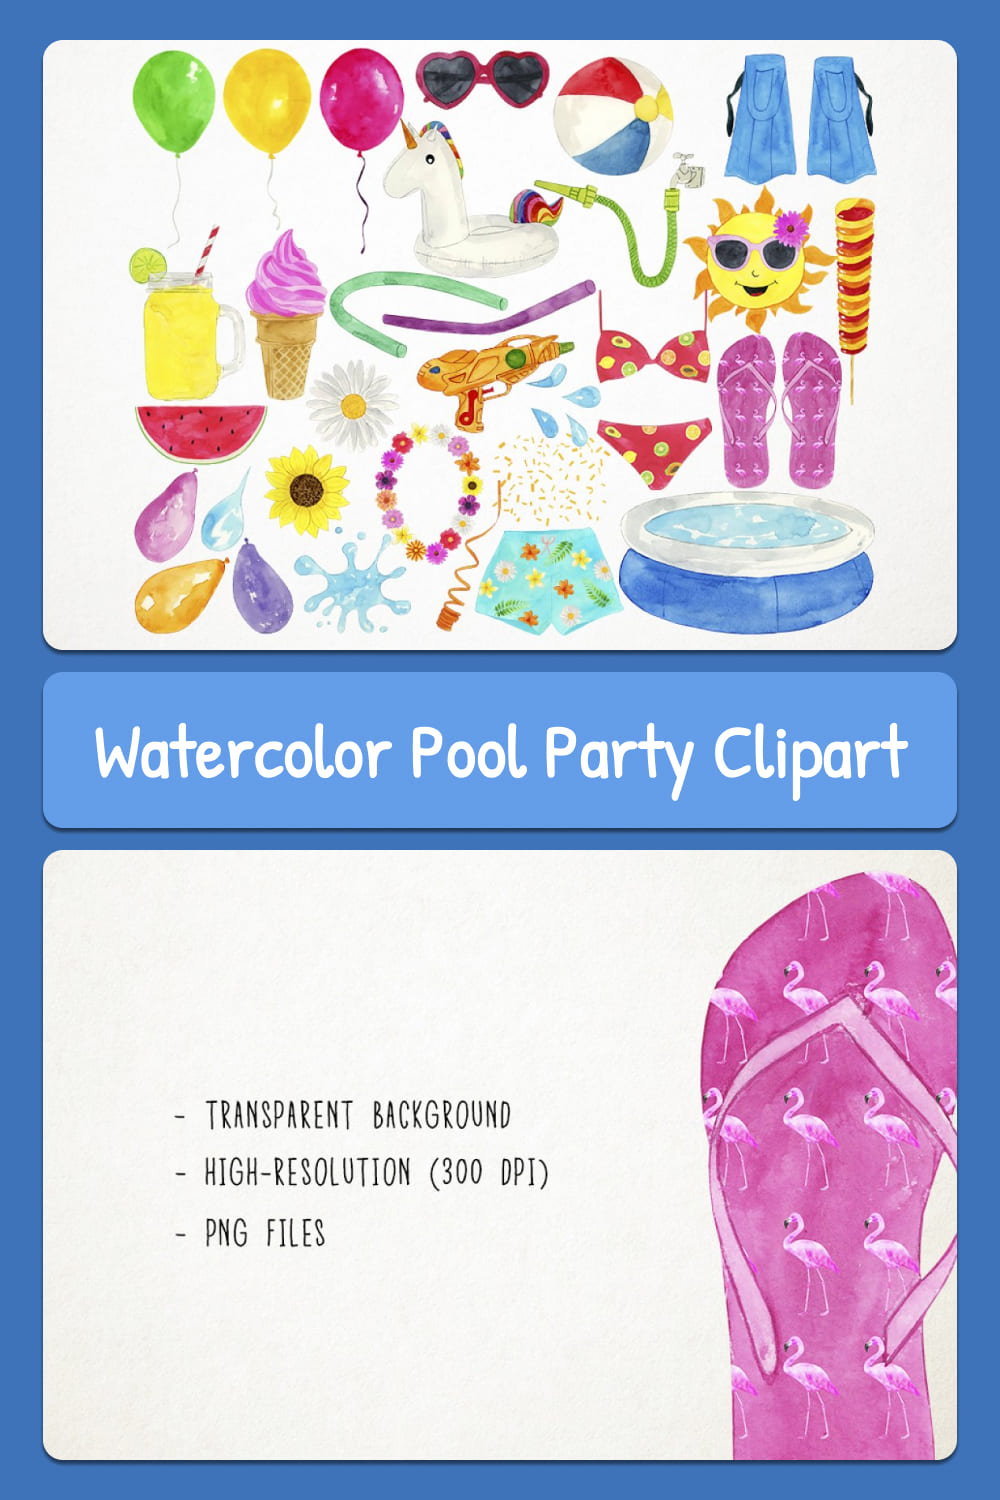 watercolor pool party clipart 03